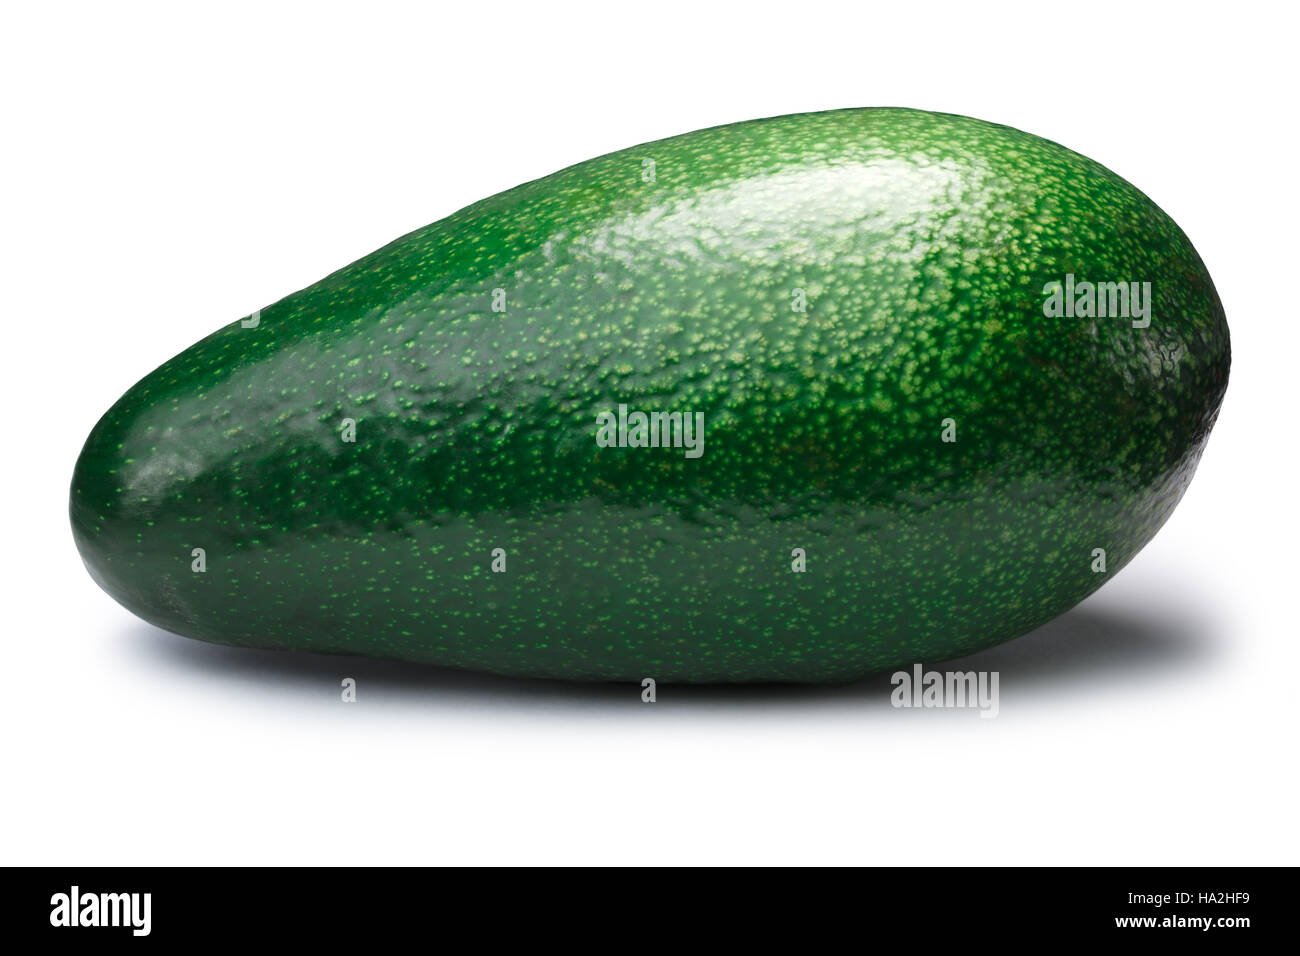 Whole green avocado Fuerte (Persea americana). Clipping paths, shadow separated Stock Photo